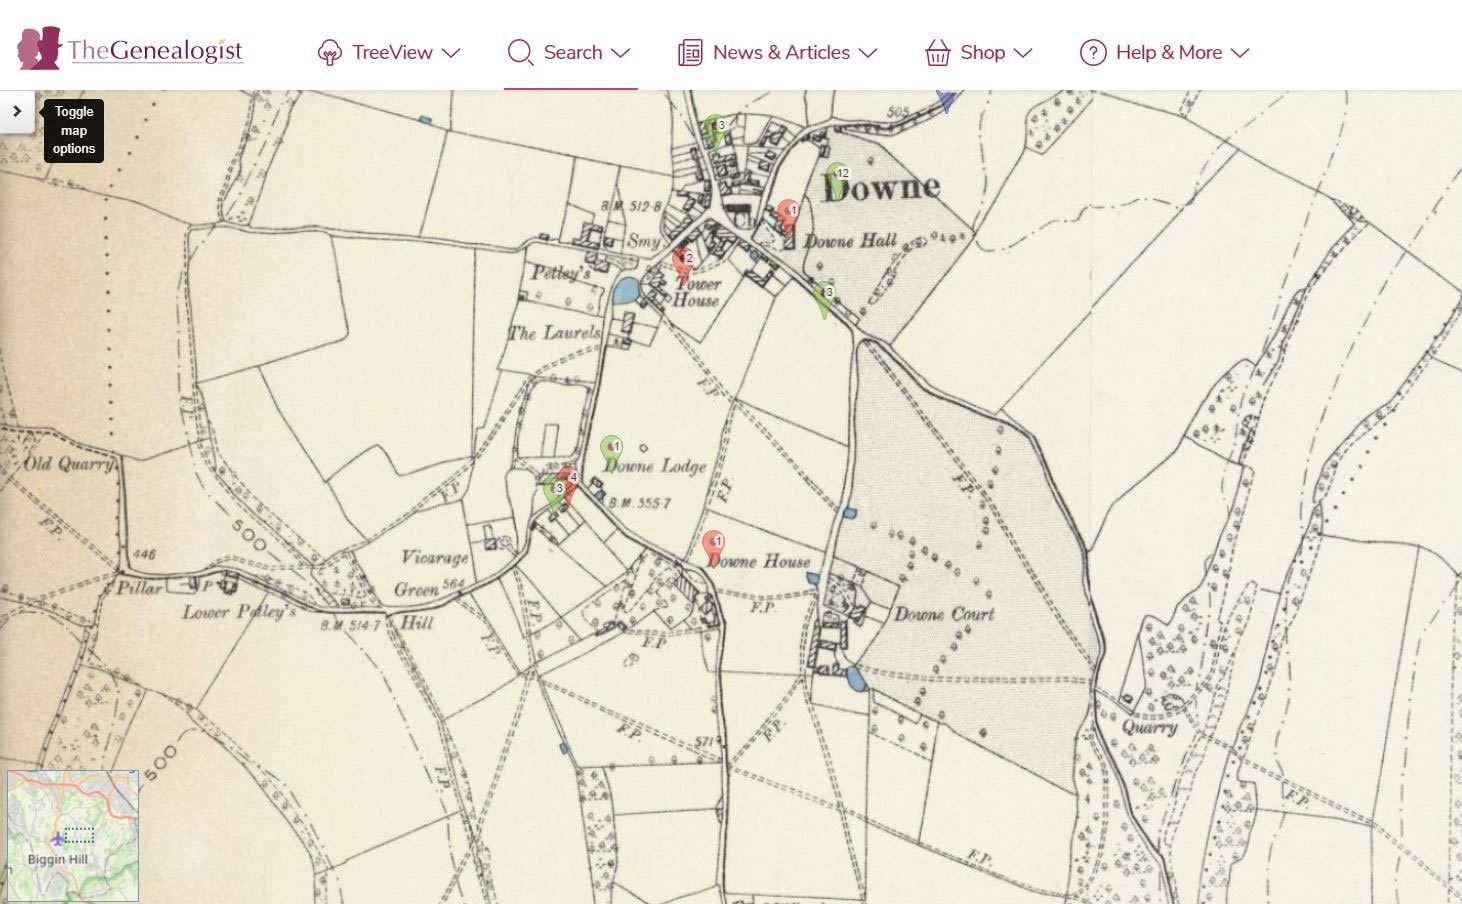 Zooming out allows us to explore the area around the location of census properties on TheGenealogist